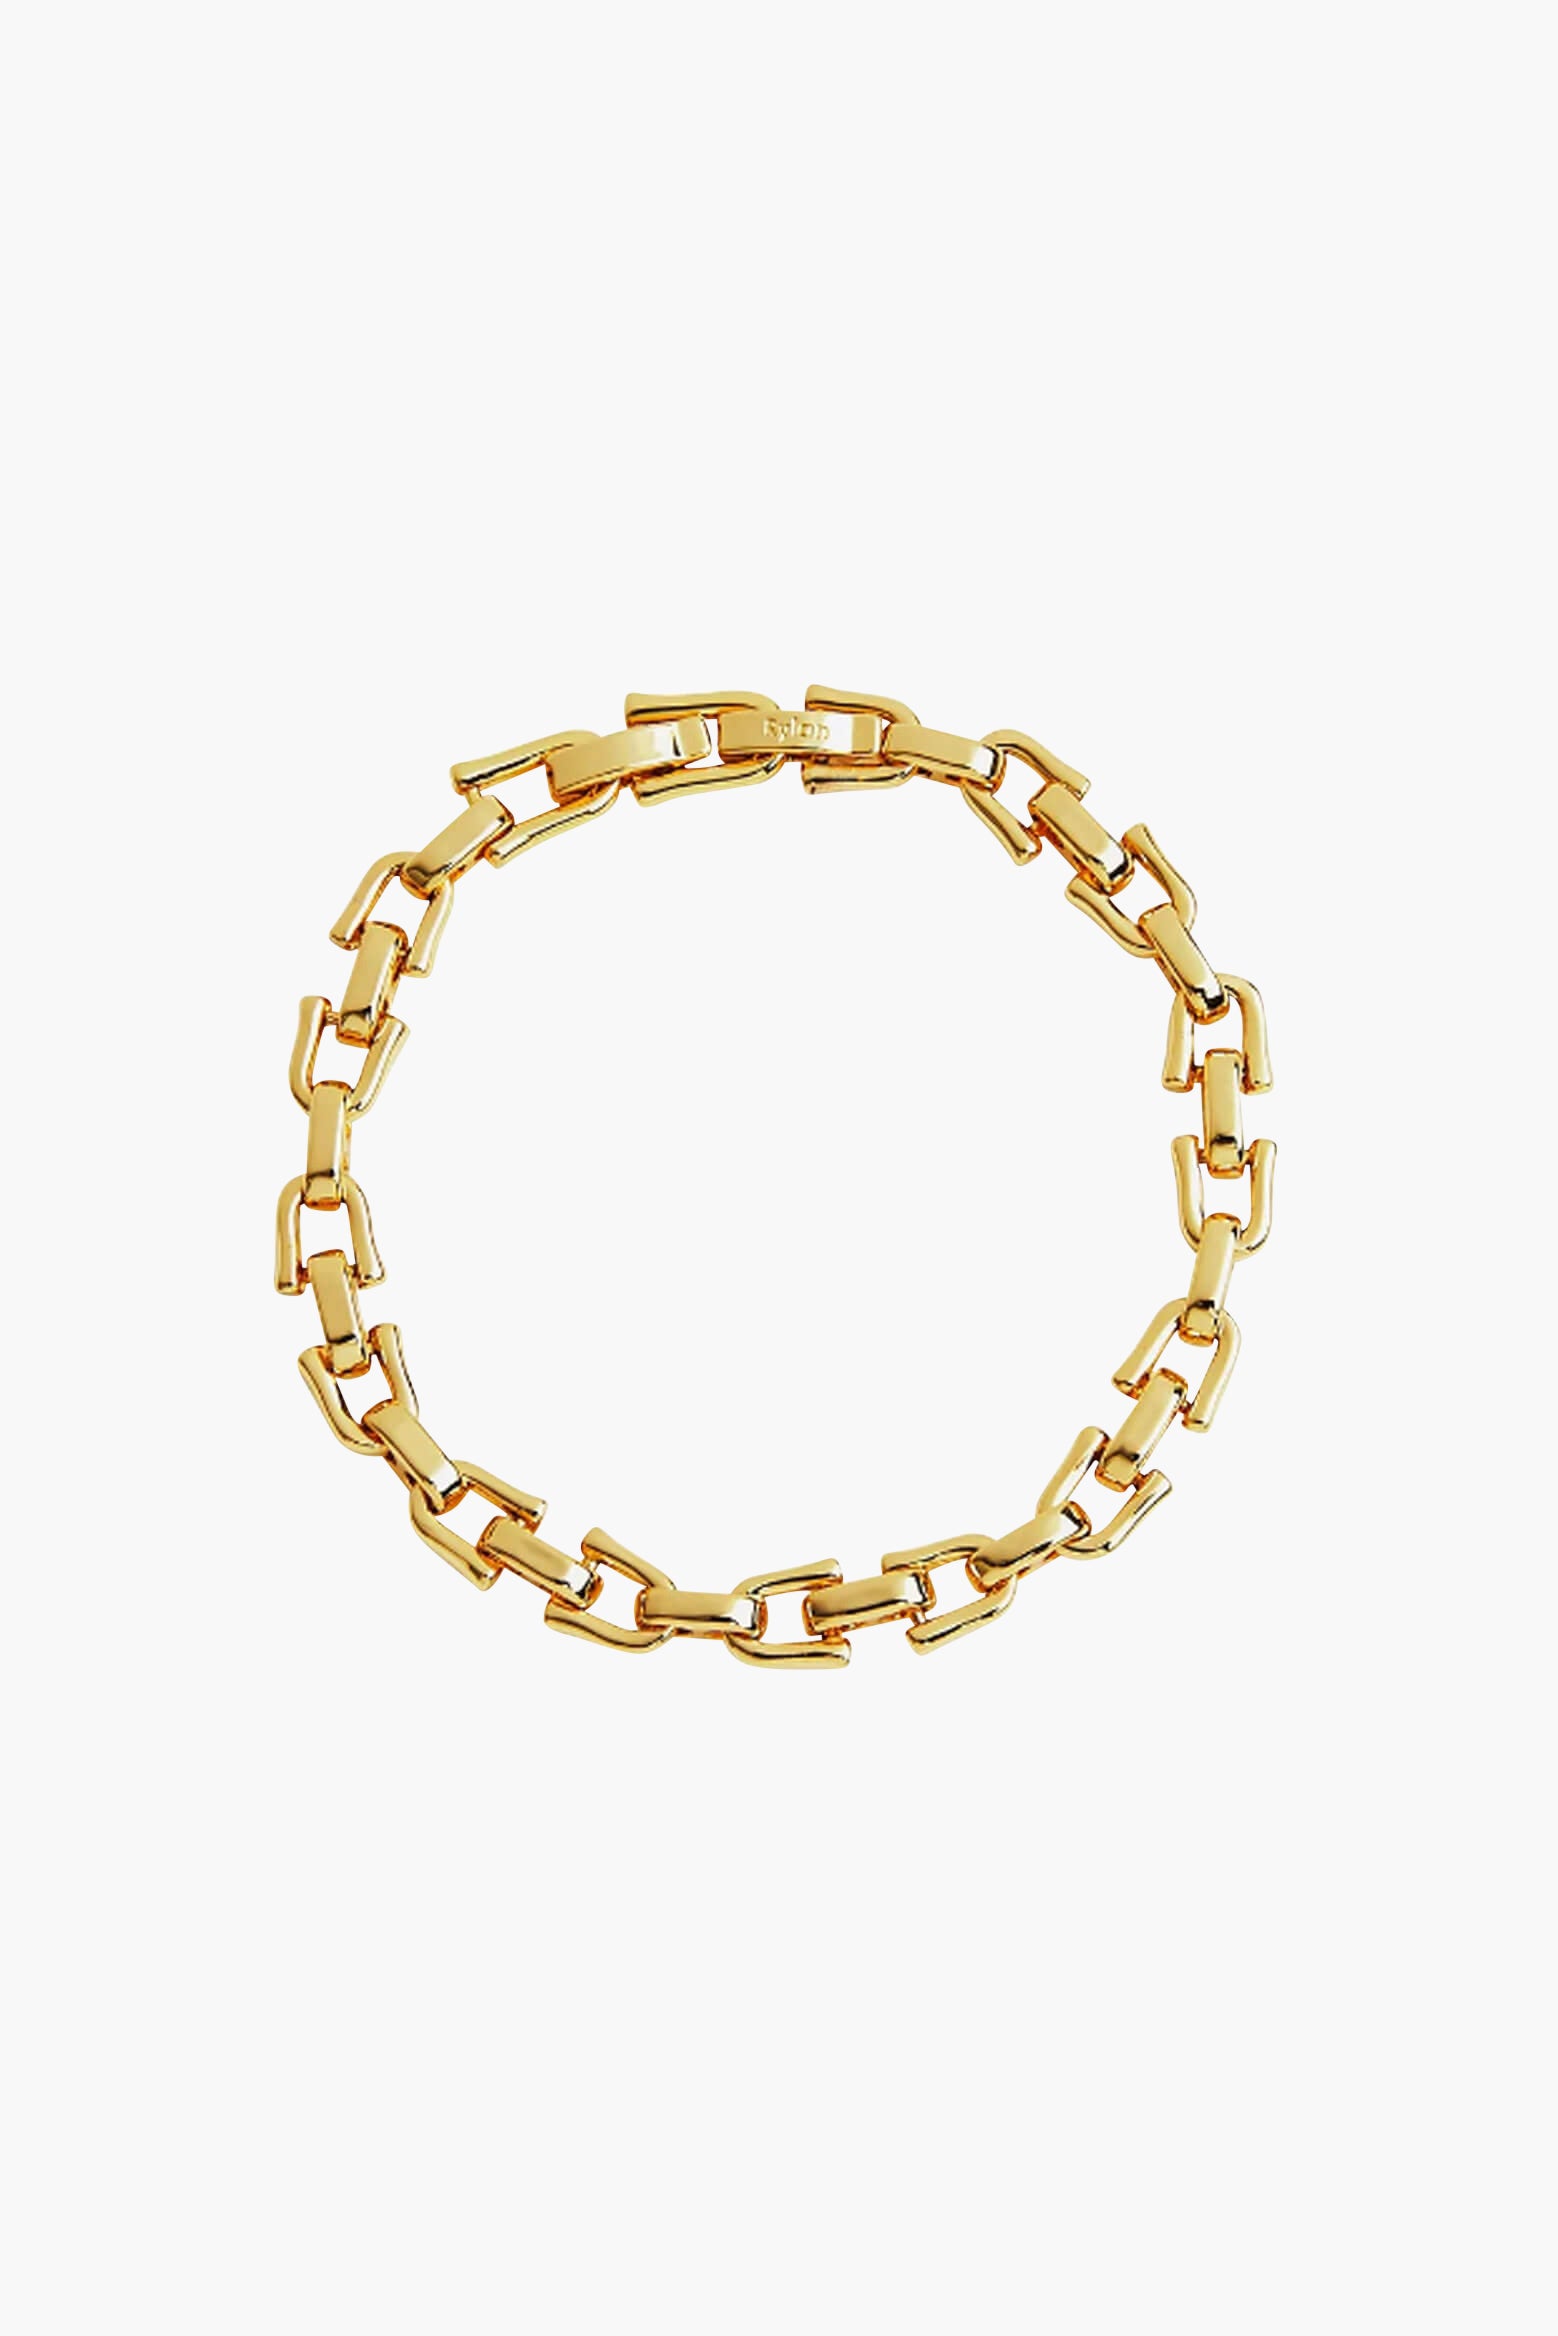 Rylan Thin Link Bracelet available at The New Trend